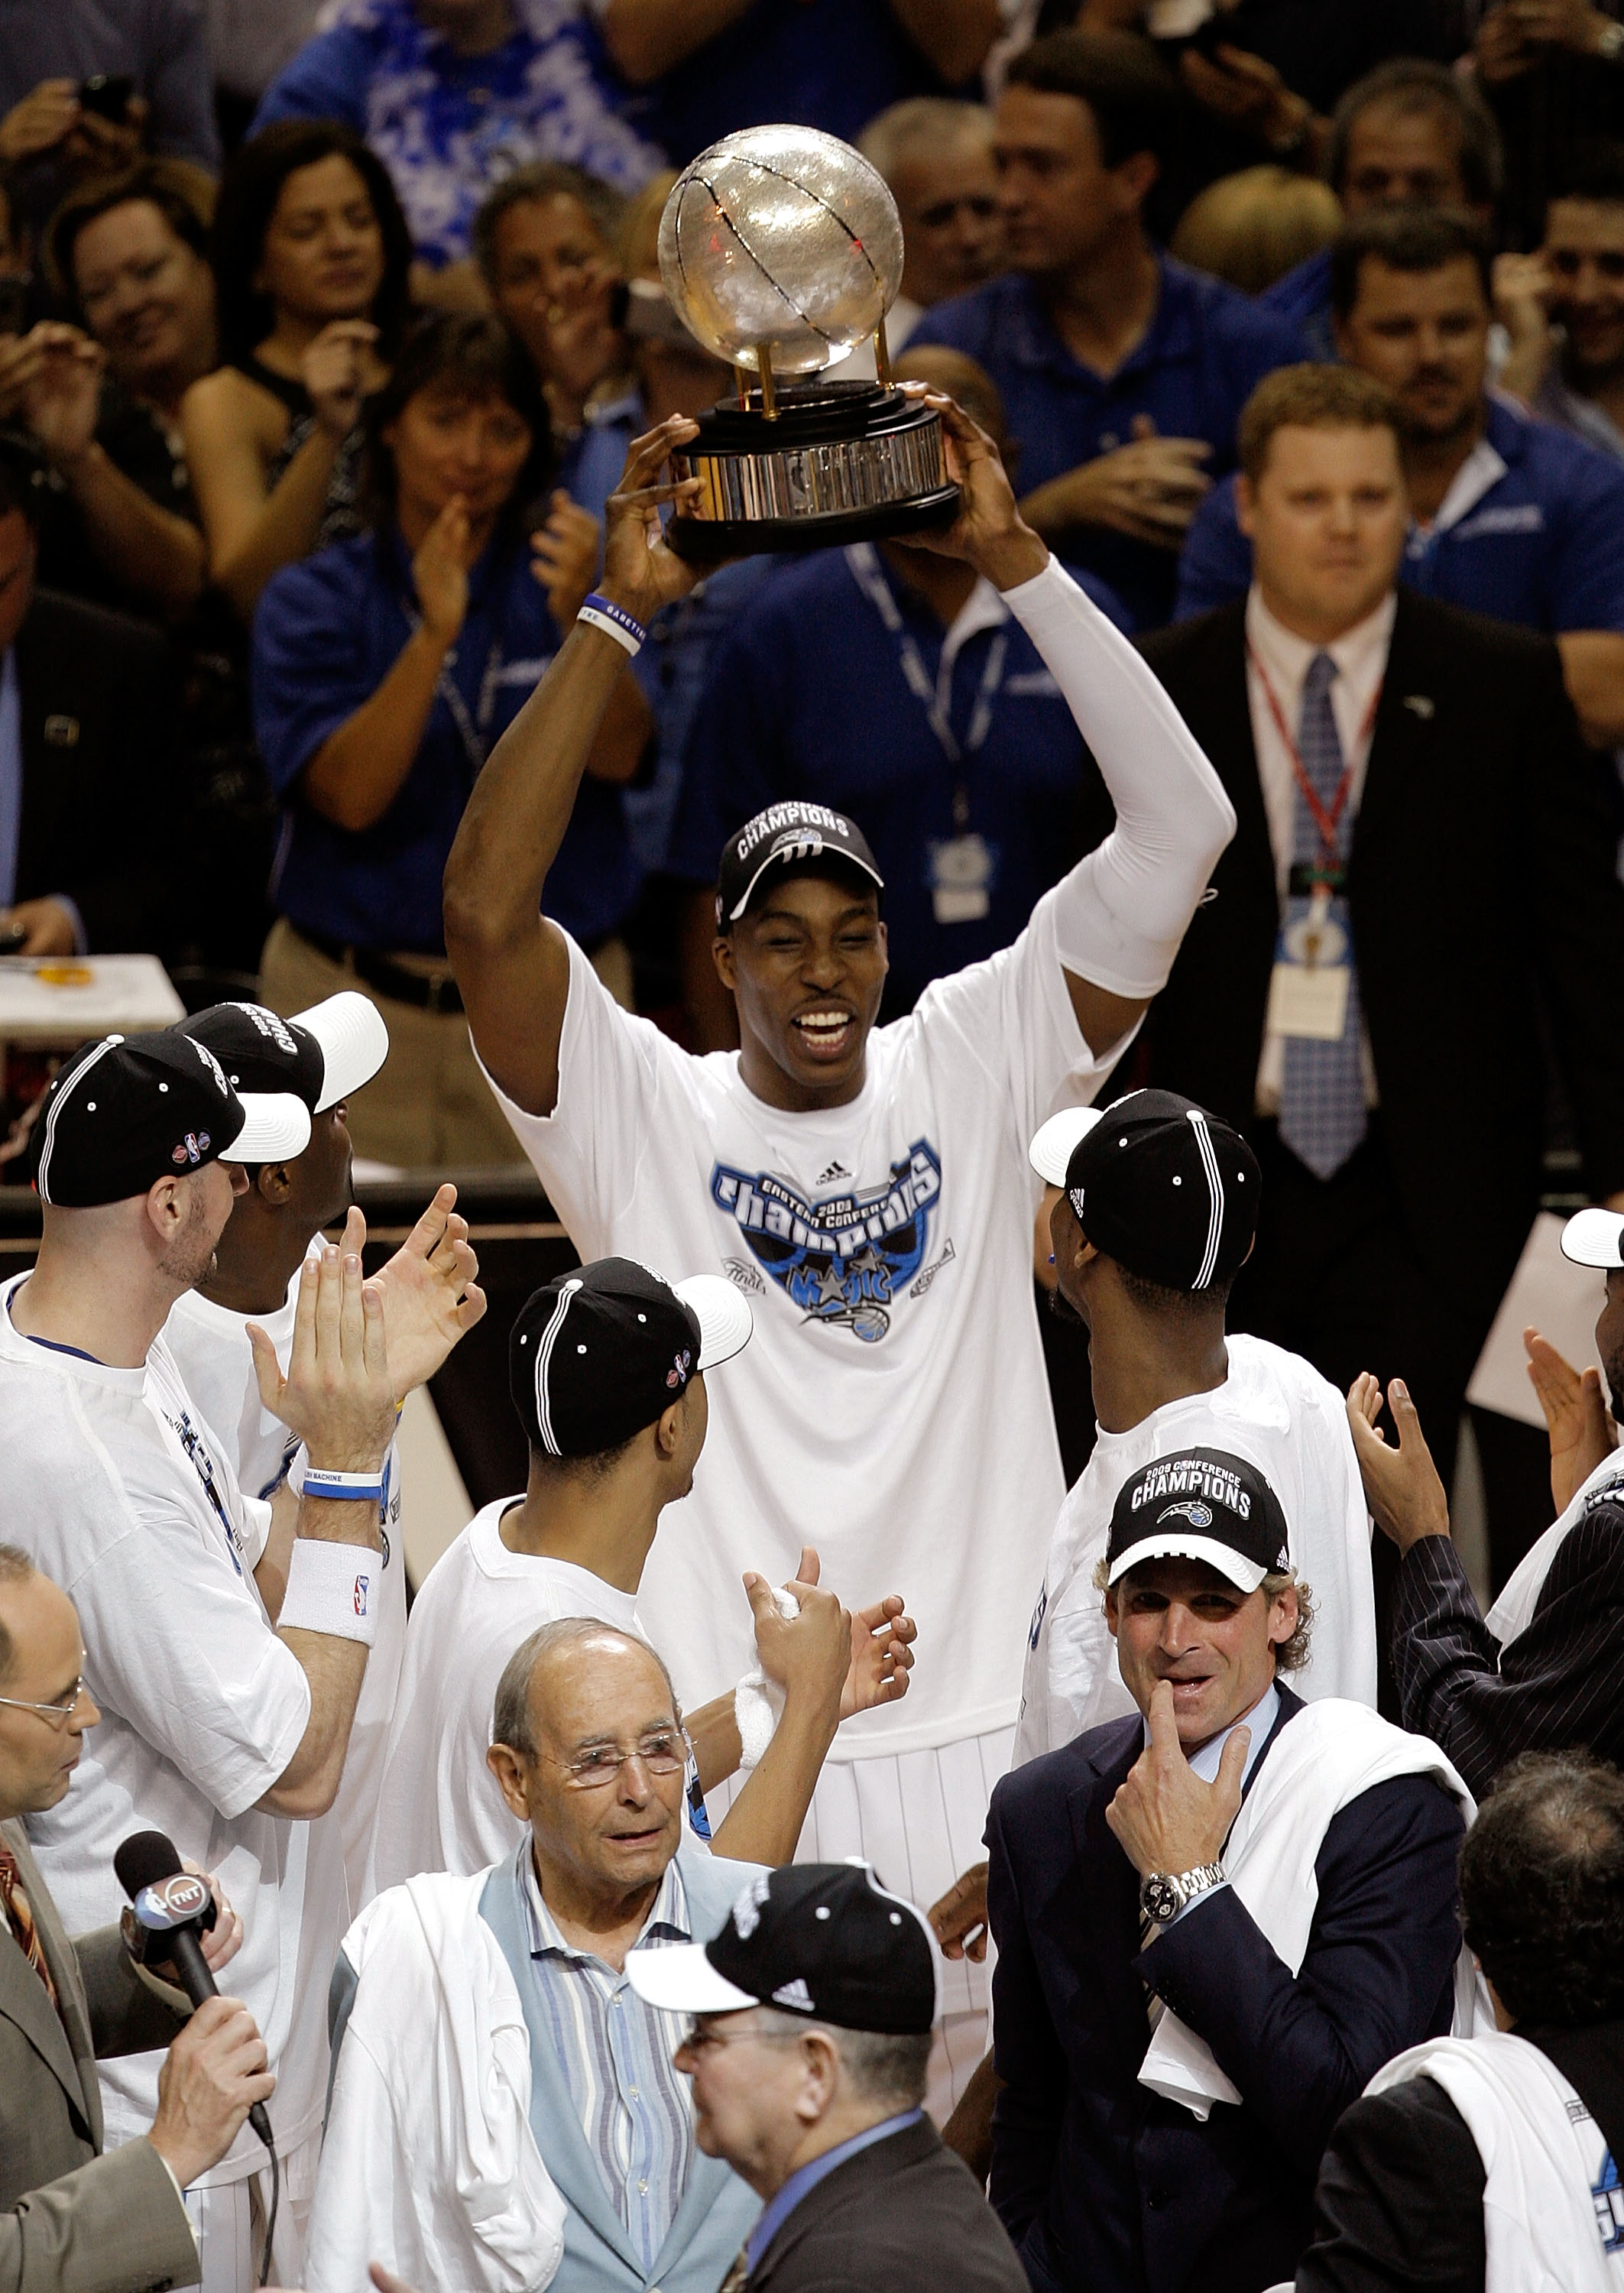 ORLANDO, FL - MAY 30: Dwight Howard #12 of the Orlando Magic holds up the trophy after defeating the Cleveland Cavaliers in Game Six of the Eastern Conference Finals during the 2009 Playoffs at Amway Arena on May 30, 2009 in Orlando, Florida. NOTE TO USER